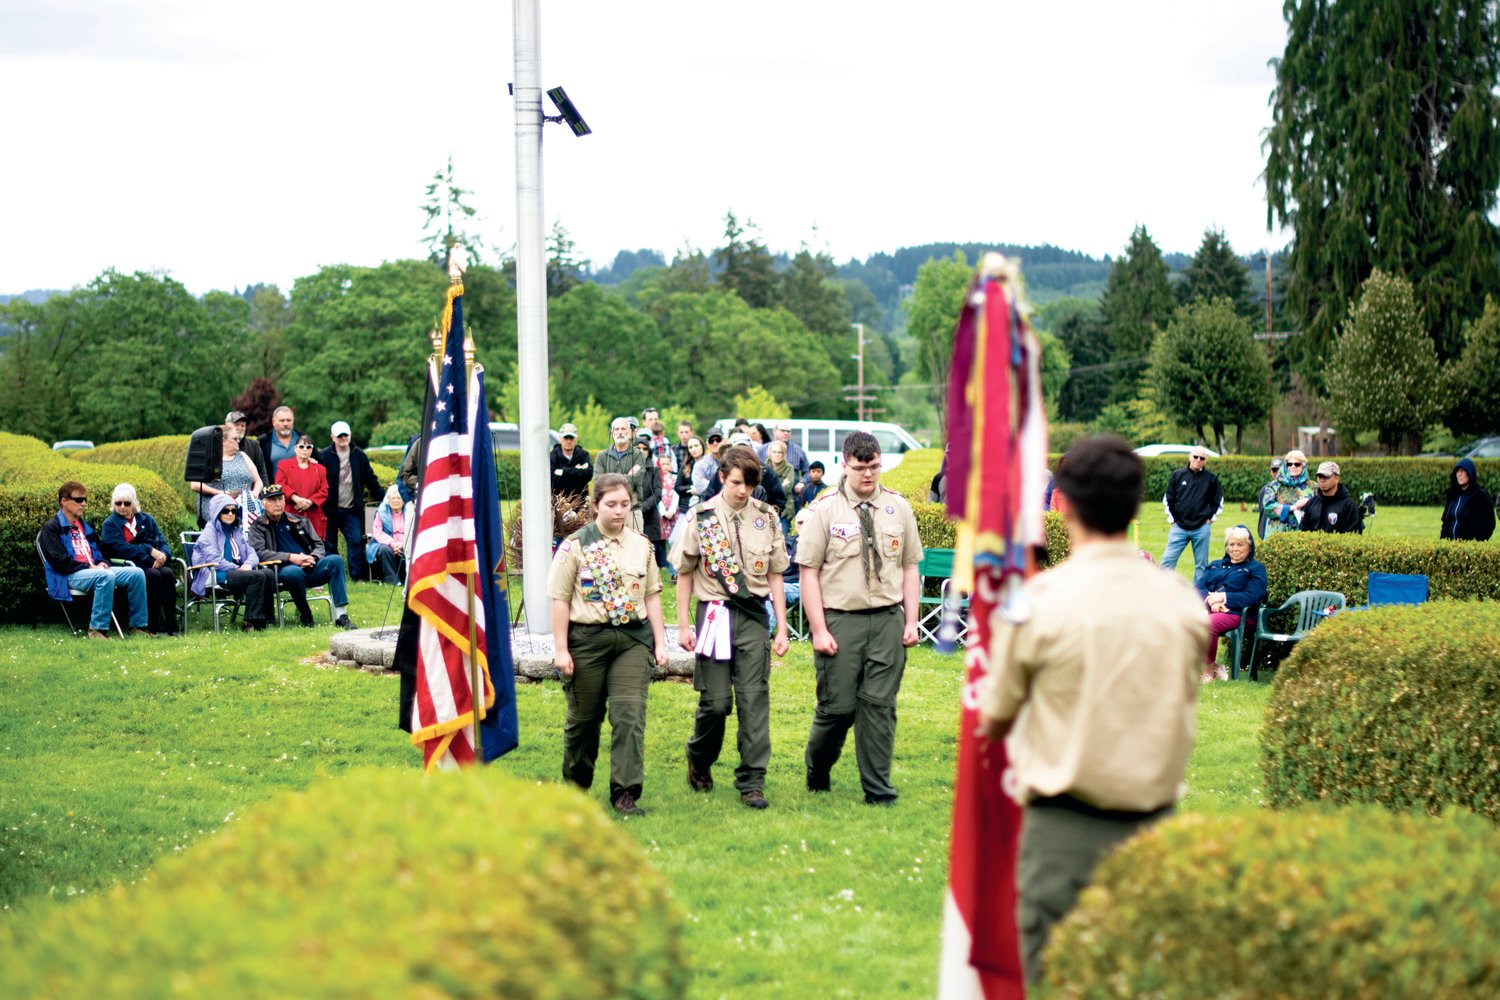 Members of Boy Scout Troop 373 walk back to their troop after laying a wreath during Monday’s Memorial Day ceremony at Claquato Cemetery. From left, Emme Prok, J. C. Mersereau and Austin Brannan.